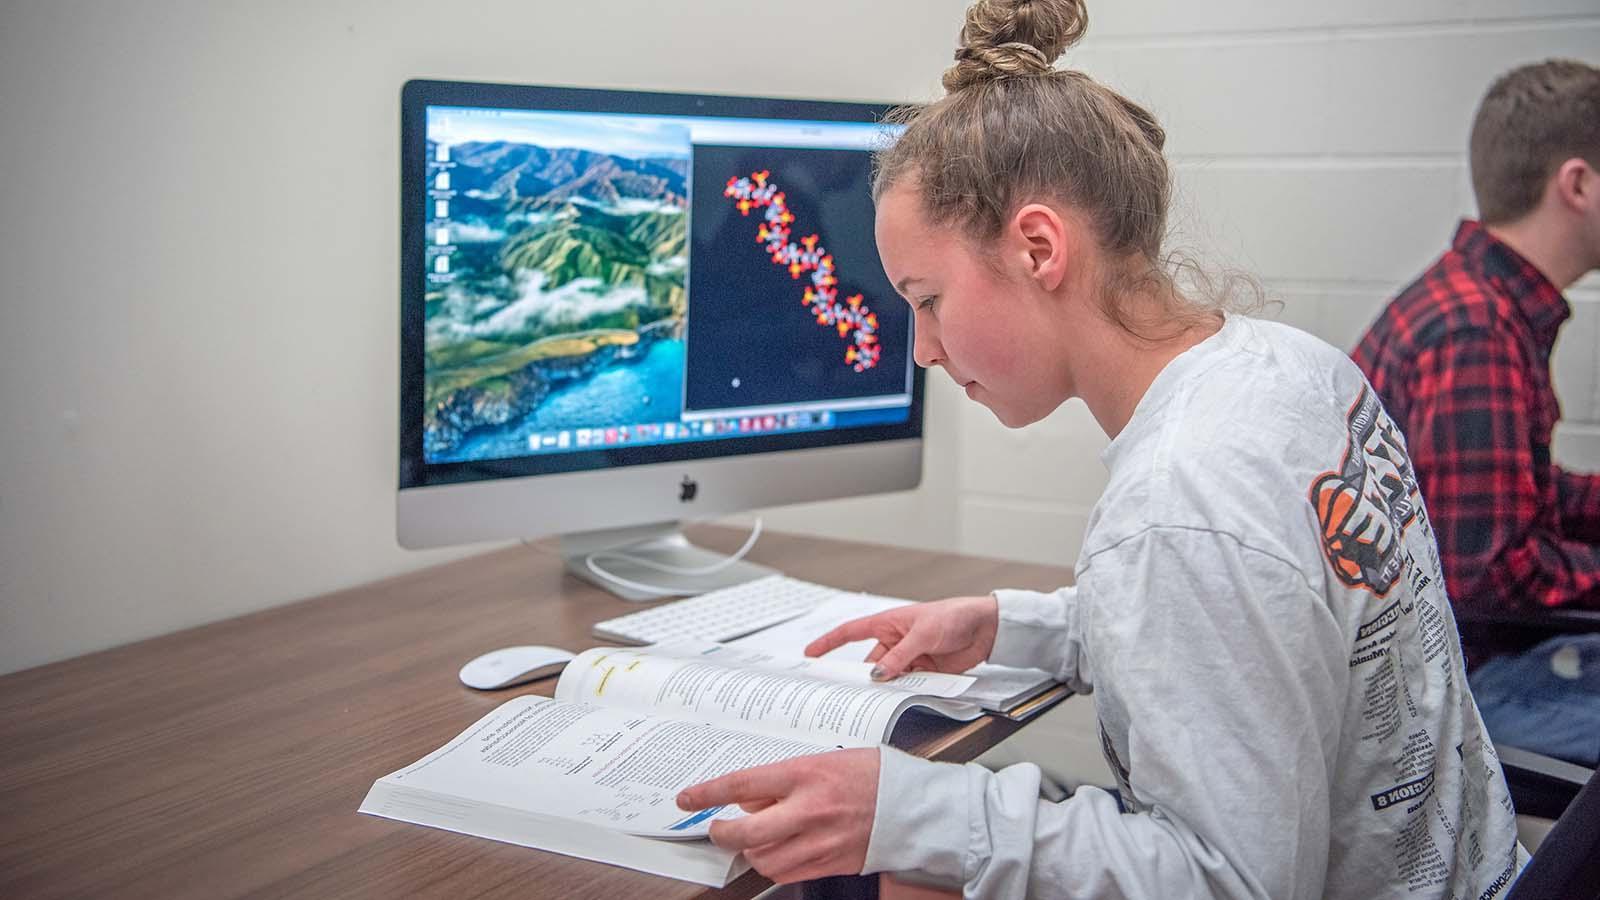 Female student looking at textbook with computer in front of her with DNA strand on the screen.